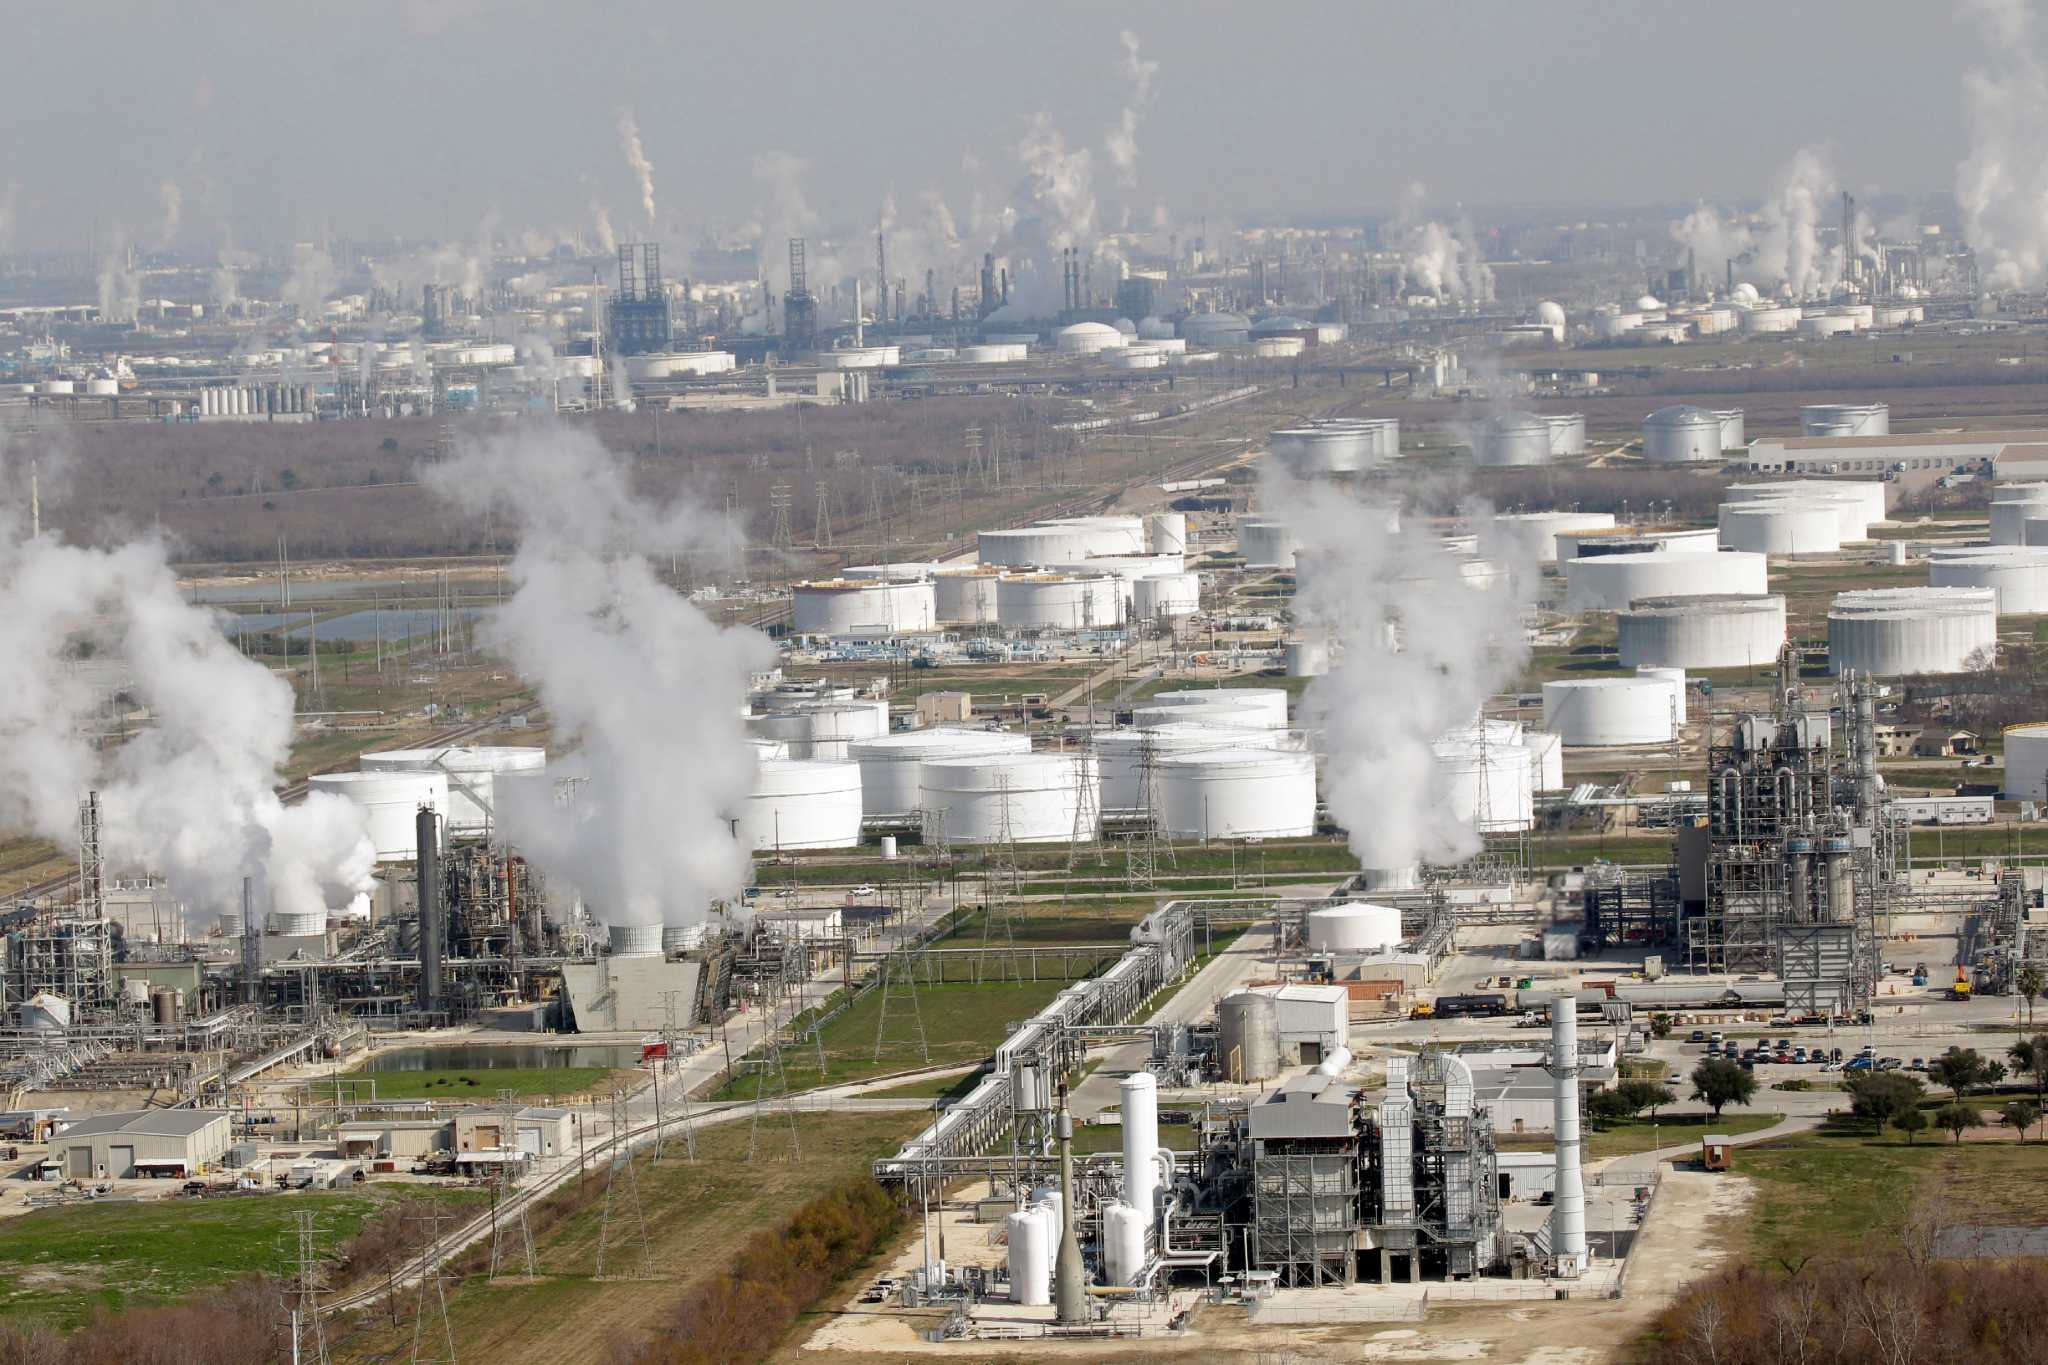 FILE - In this Nov. 10, 2010 file photo, petrochemical plants and refineries are shown in this aerial view, in Deer Park, Texas. Three commissioners appointed by Gov. Rick Perry may grant some of the nation's largest refineries a tax refund of more than $135 million. (AP Photo/David J. Phillip, File)